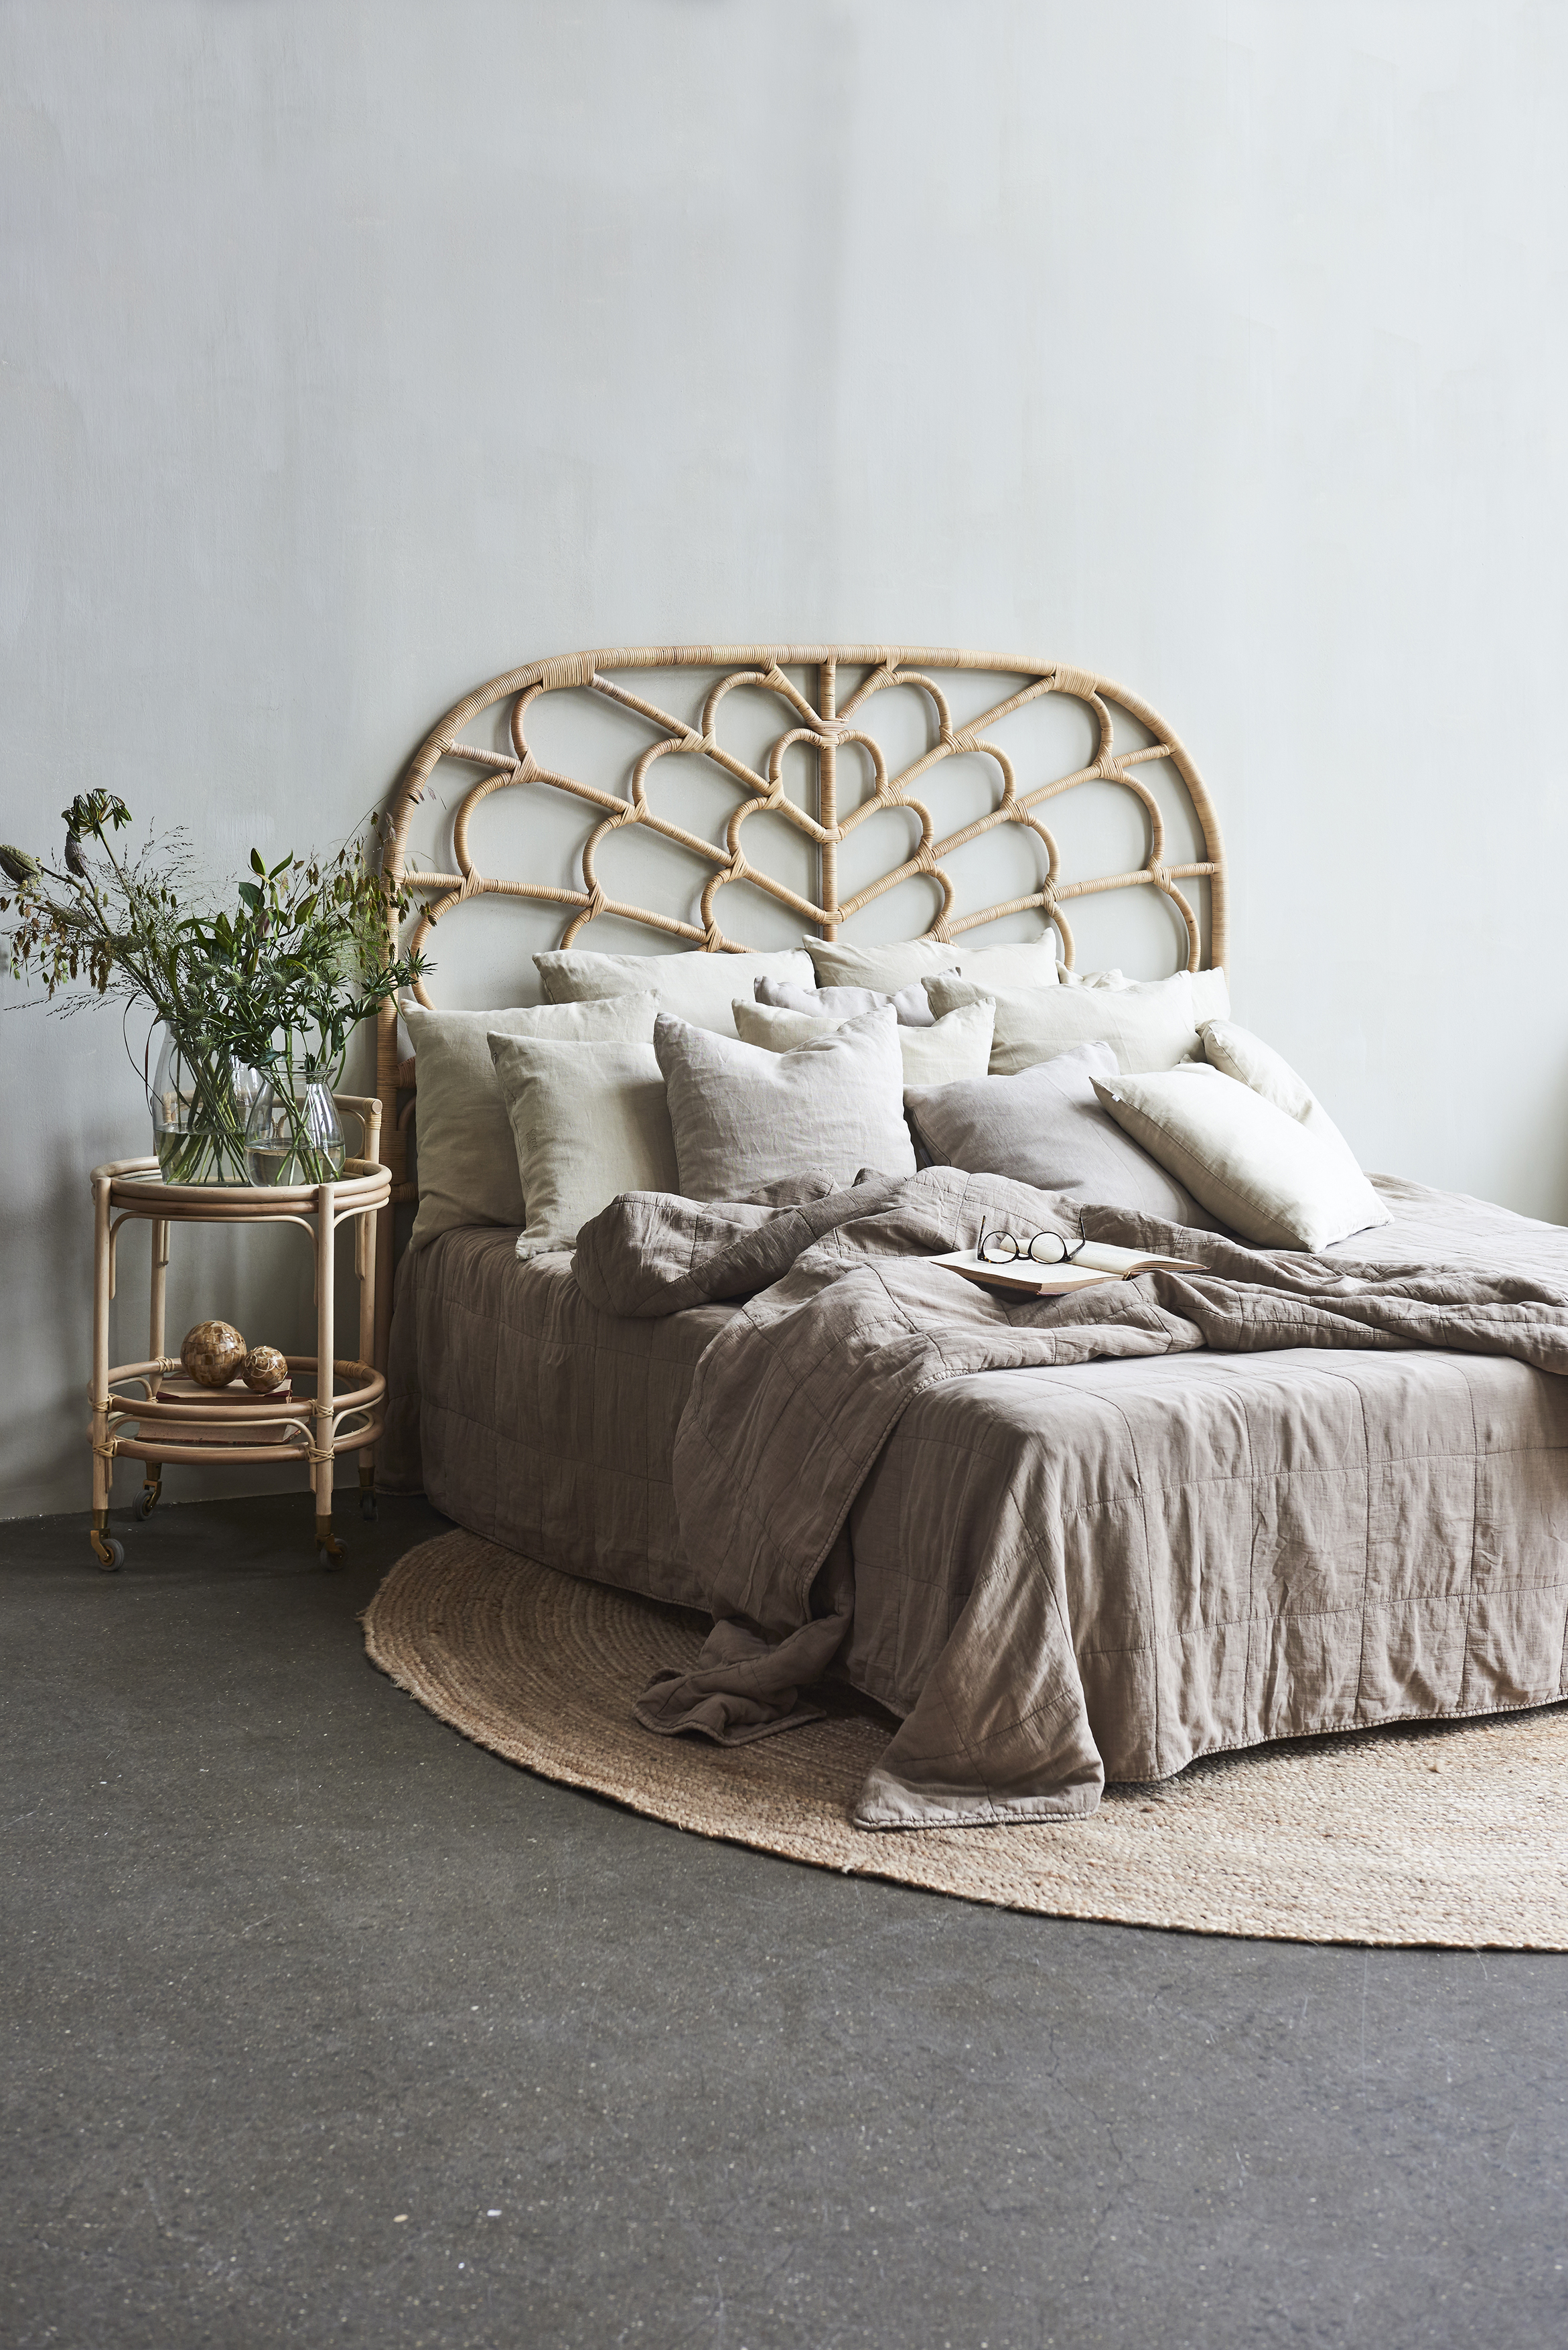 Interiors Trend: Rattan, Cane, Natural Style